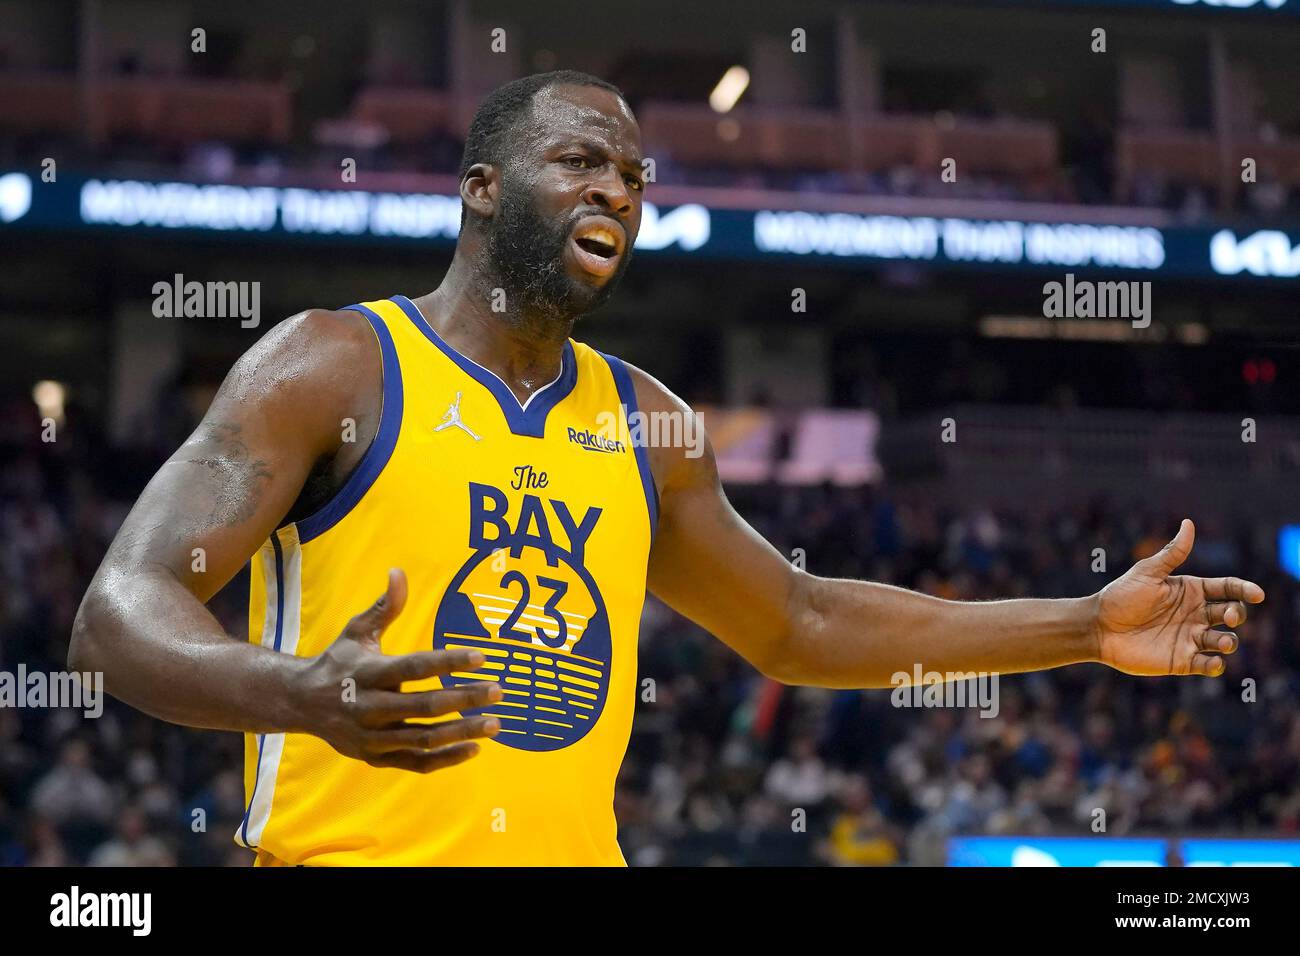 Draymond Green (23) of the Golden State Warriors reacts during the